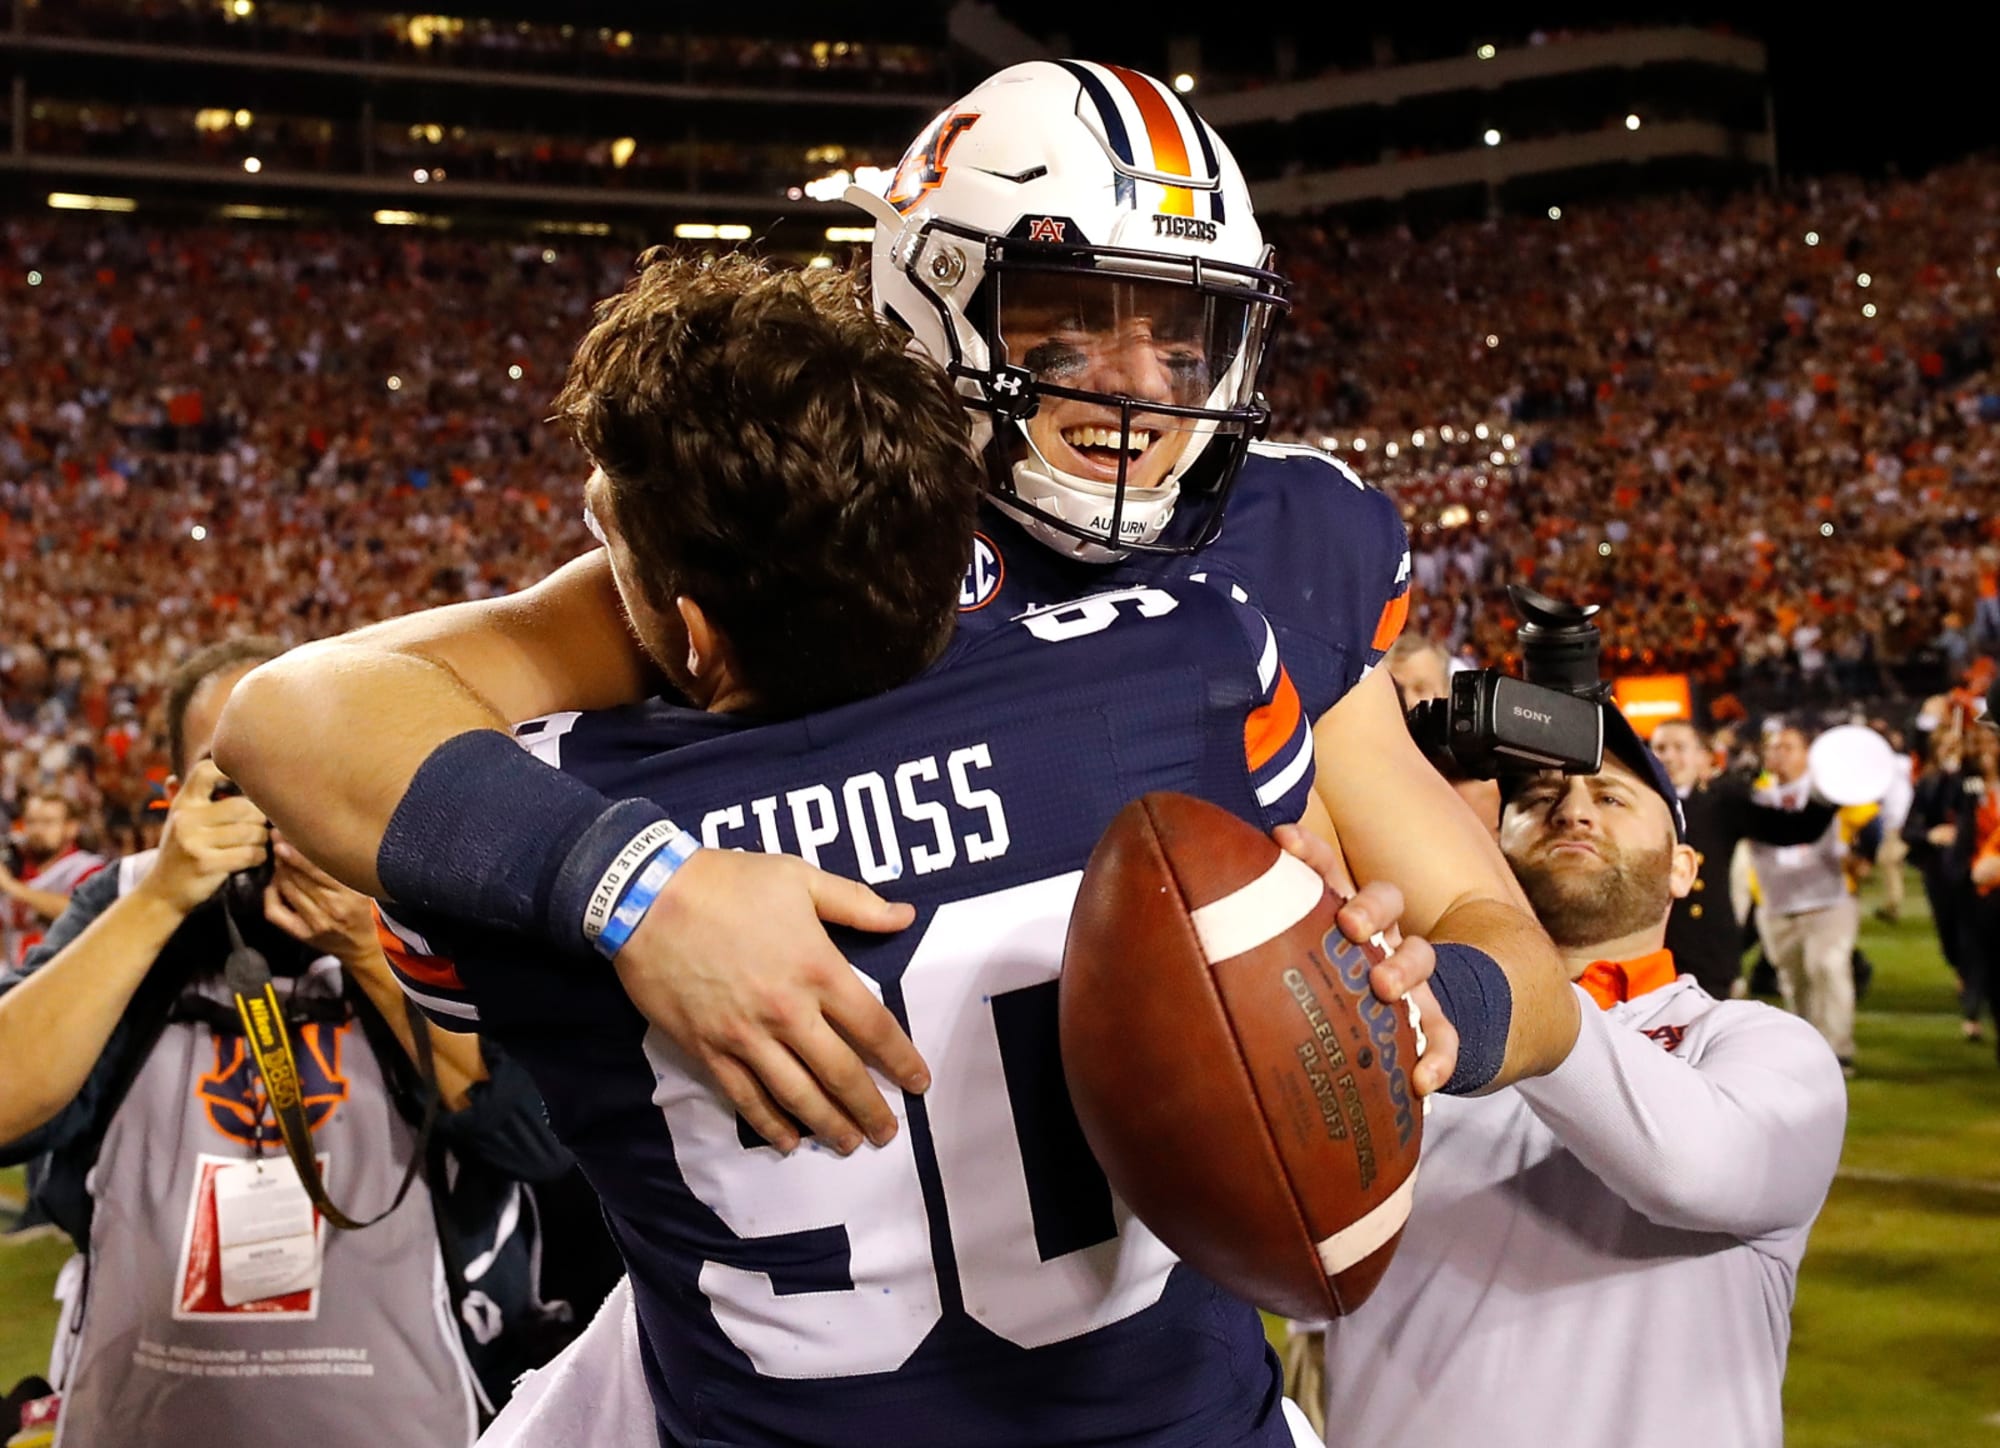 Auburn football Big Cat Weekend is back and better than ever